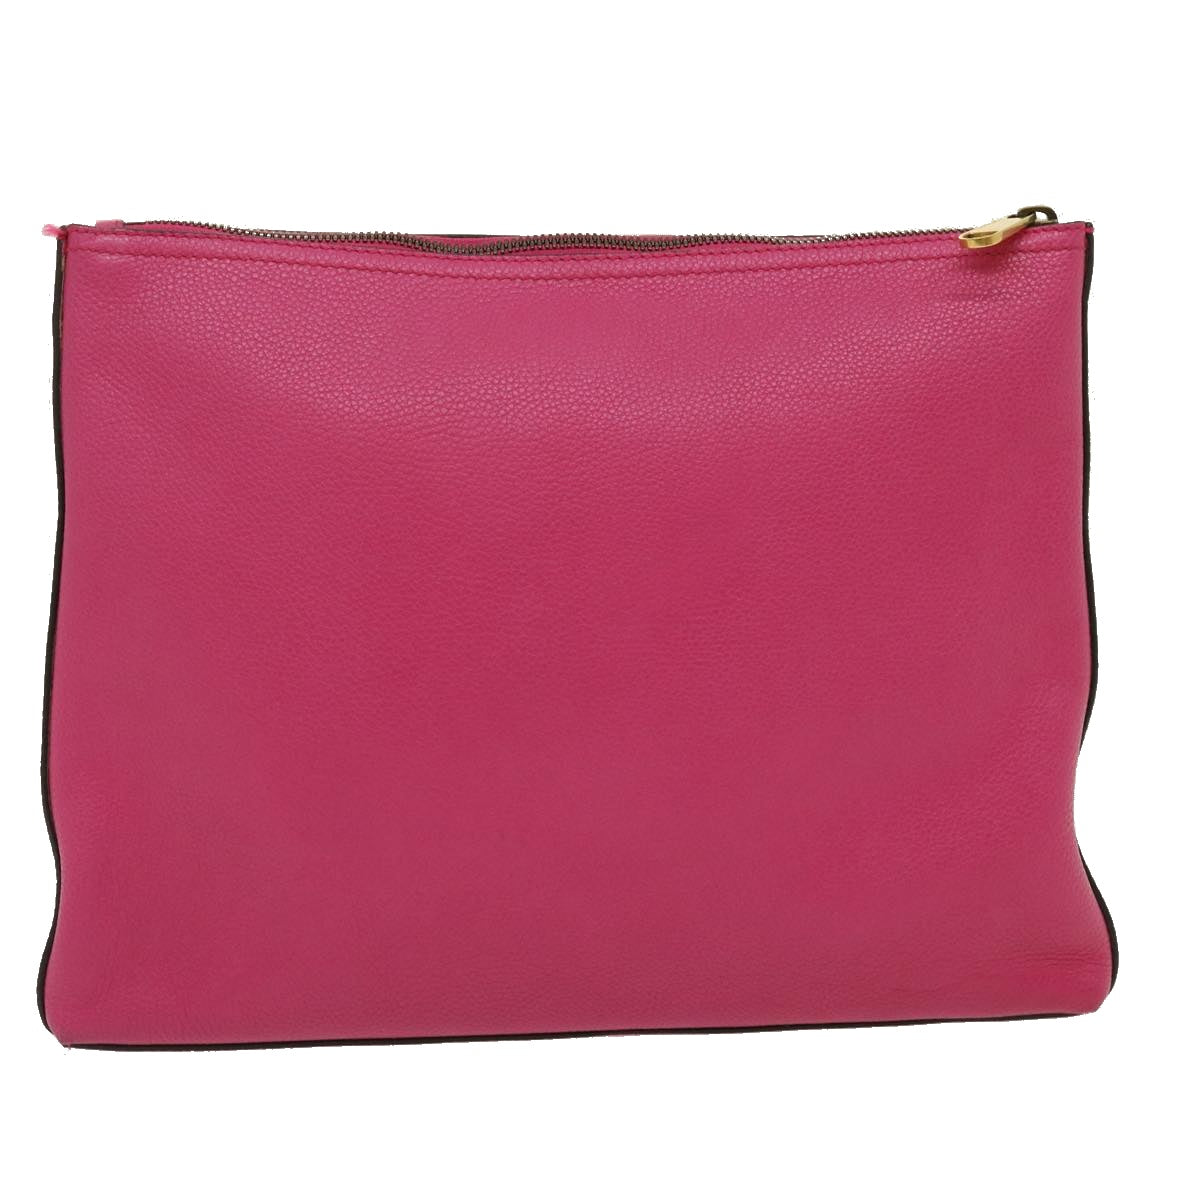 GUCCI Web Sherry Line Soho Clutch Bag Leather Pink Auth am2581g